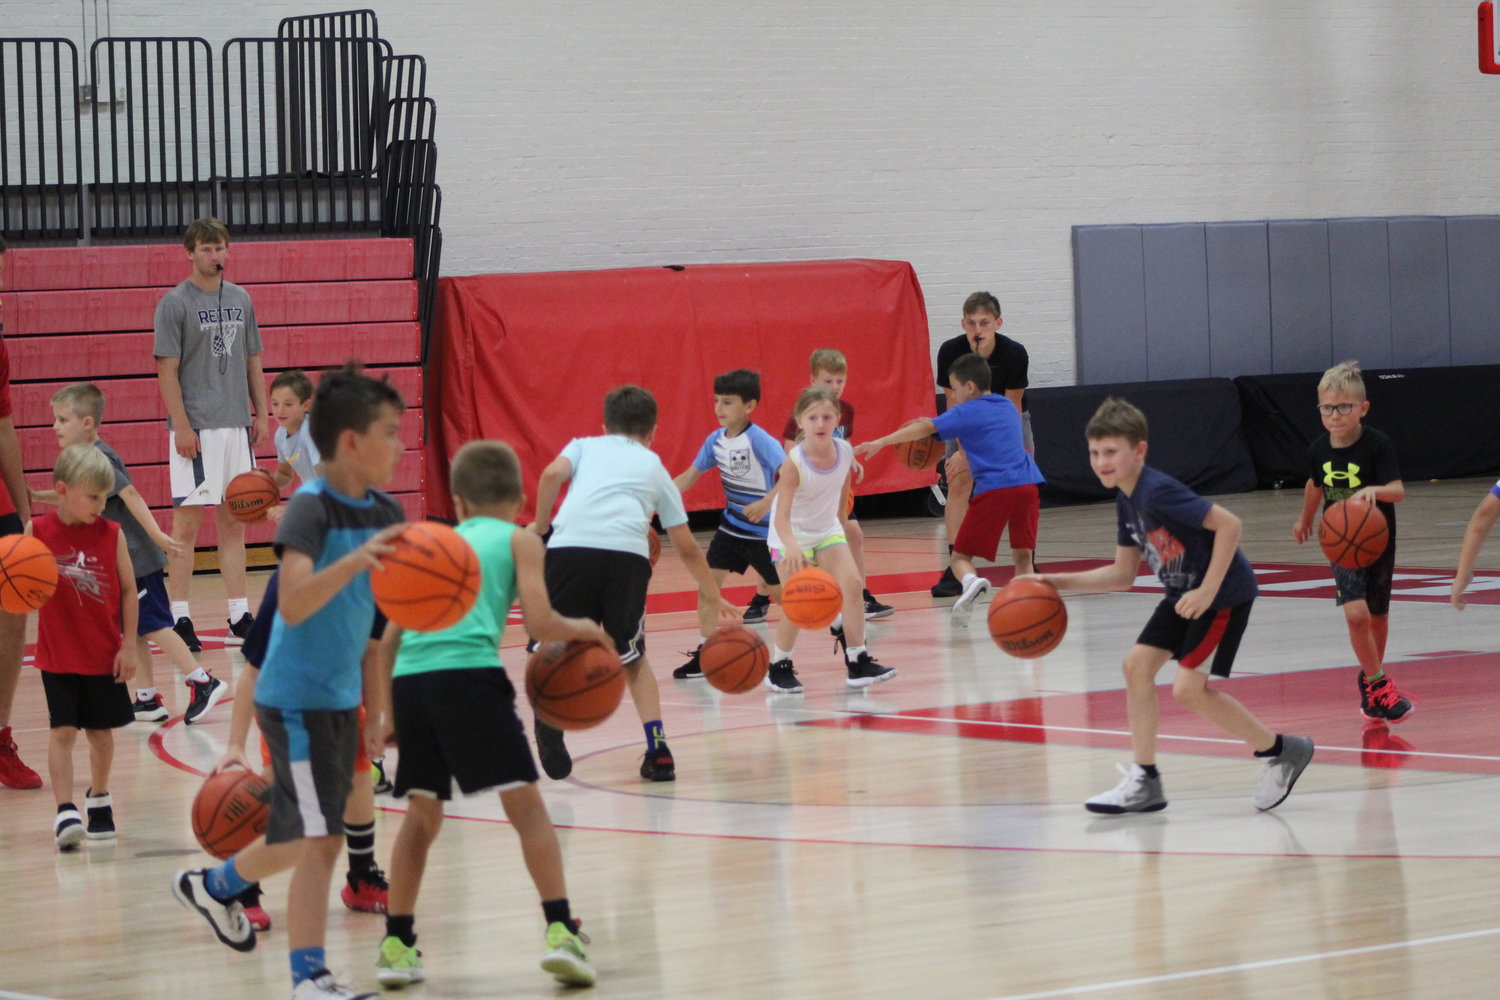 The campers practice their dribbling skills during a drill.